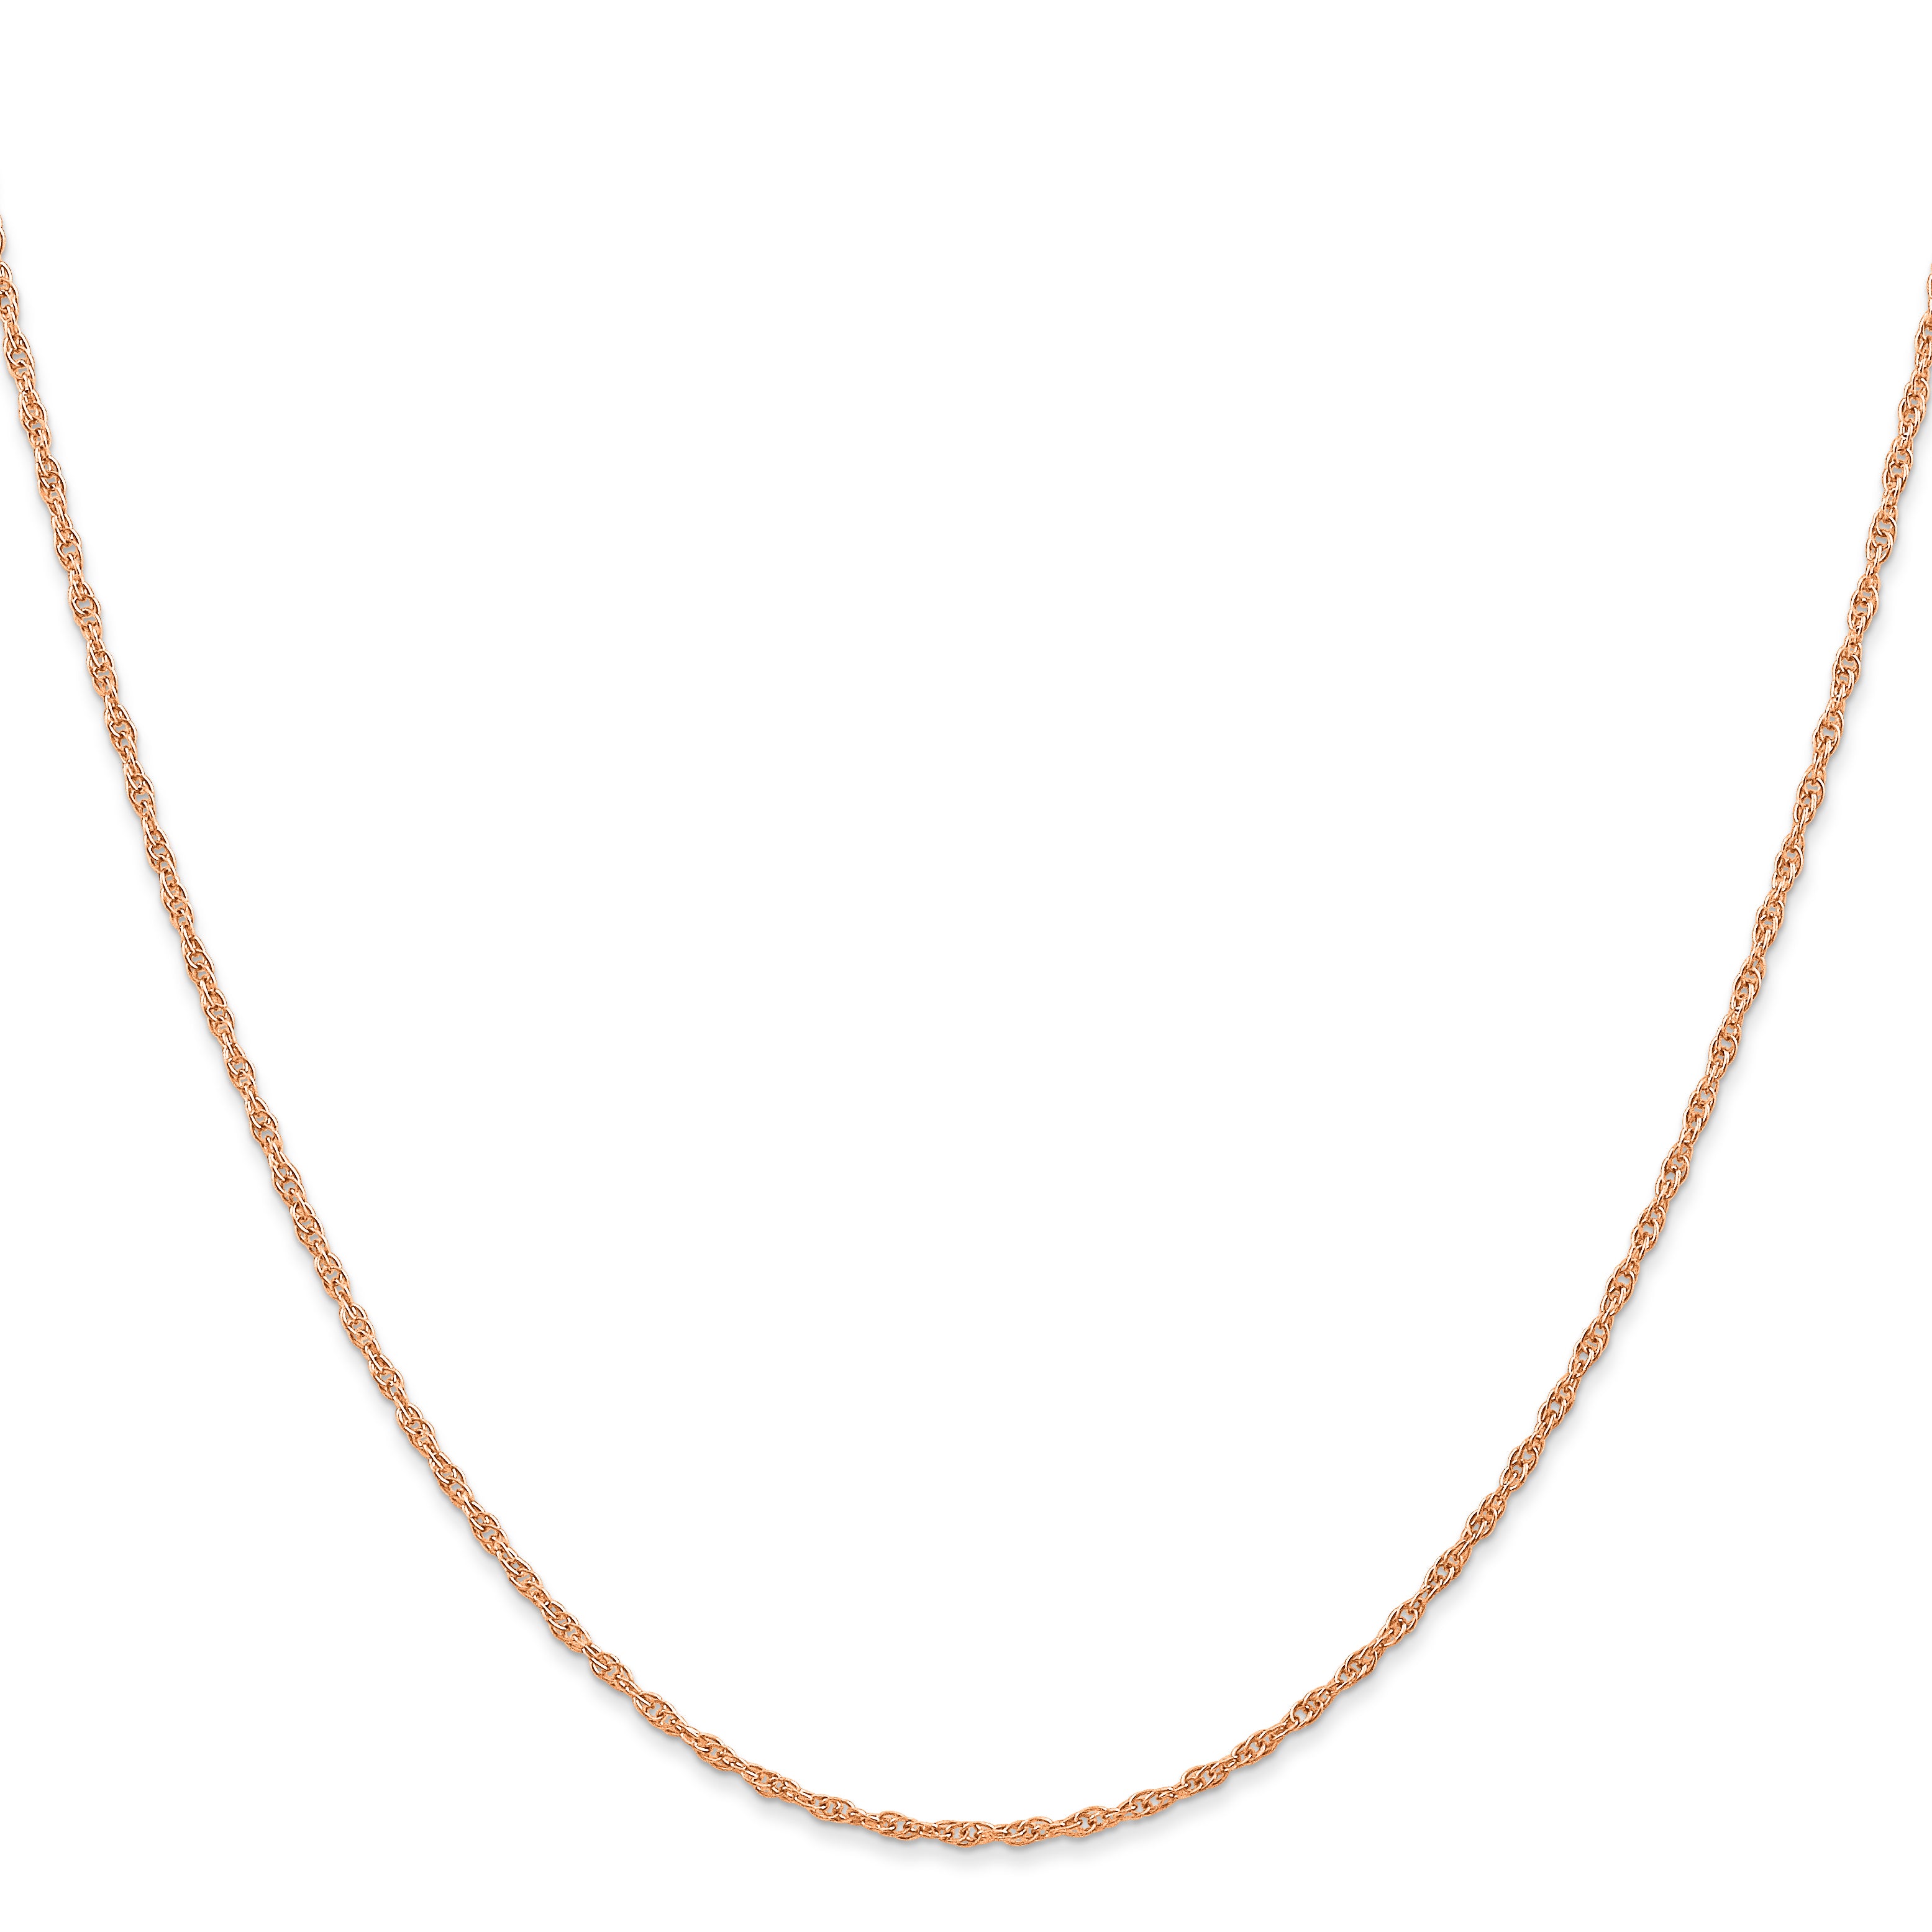 14K Rose Gold 16 inch Carded 1.15mm Cable Rope with Spring Ring Clasp Chain